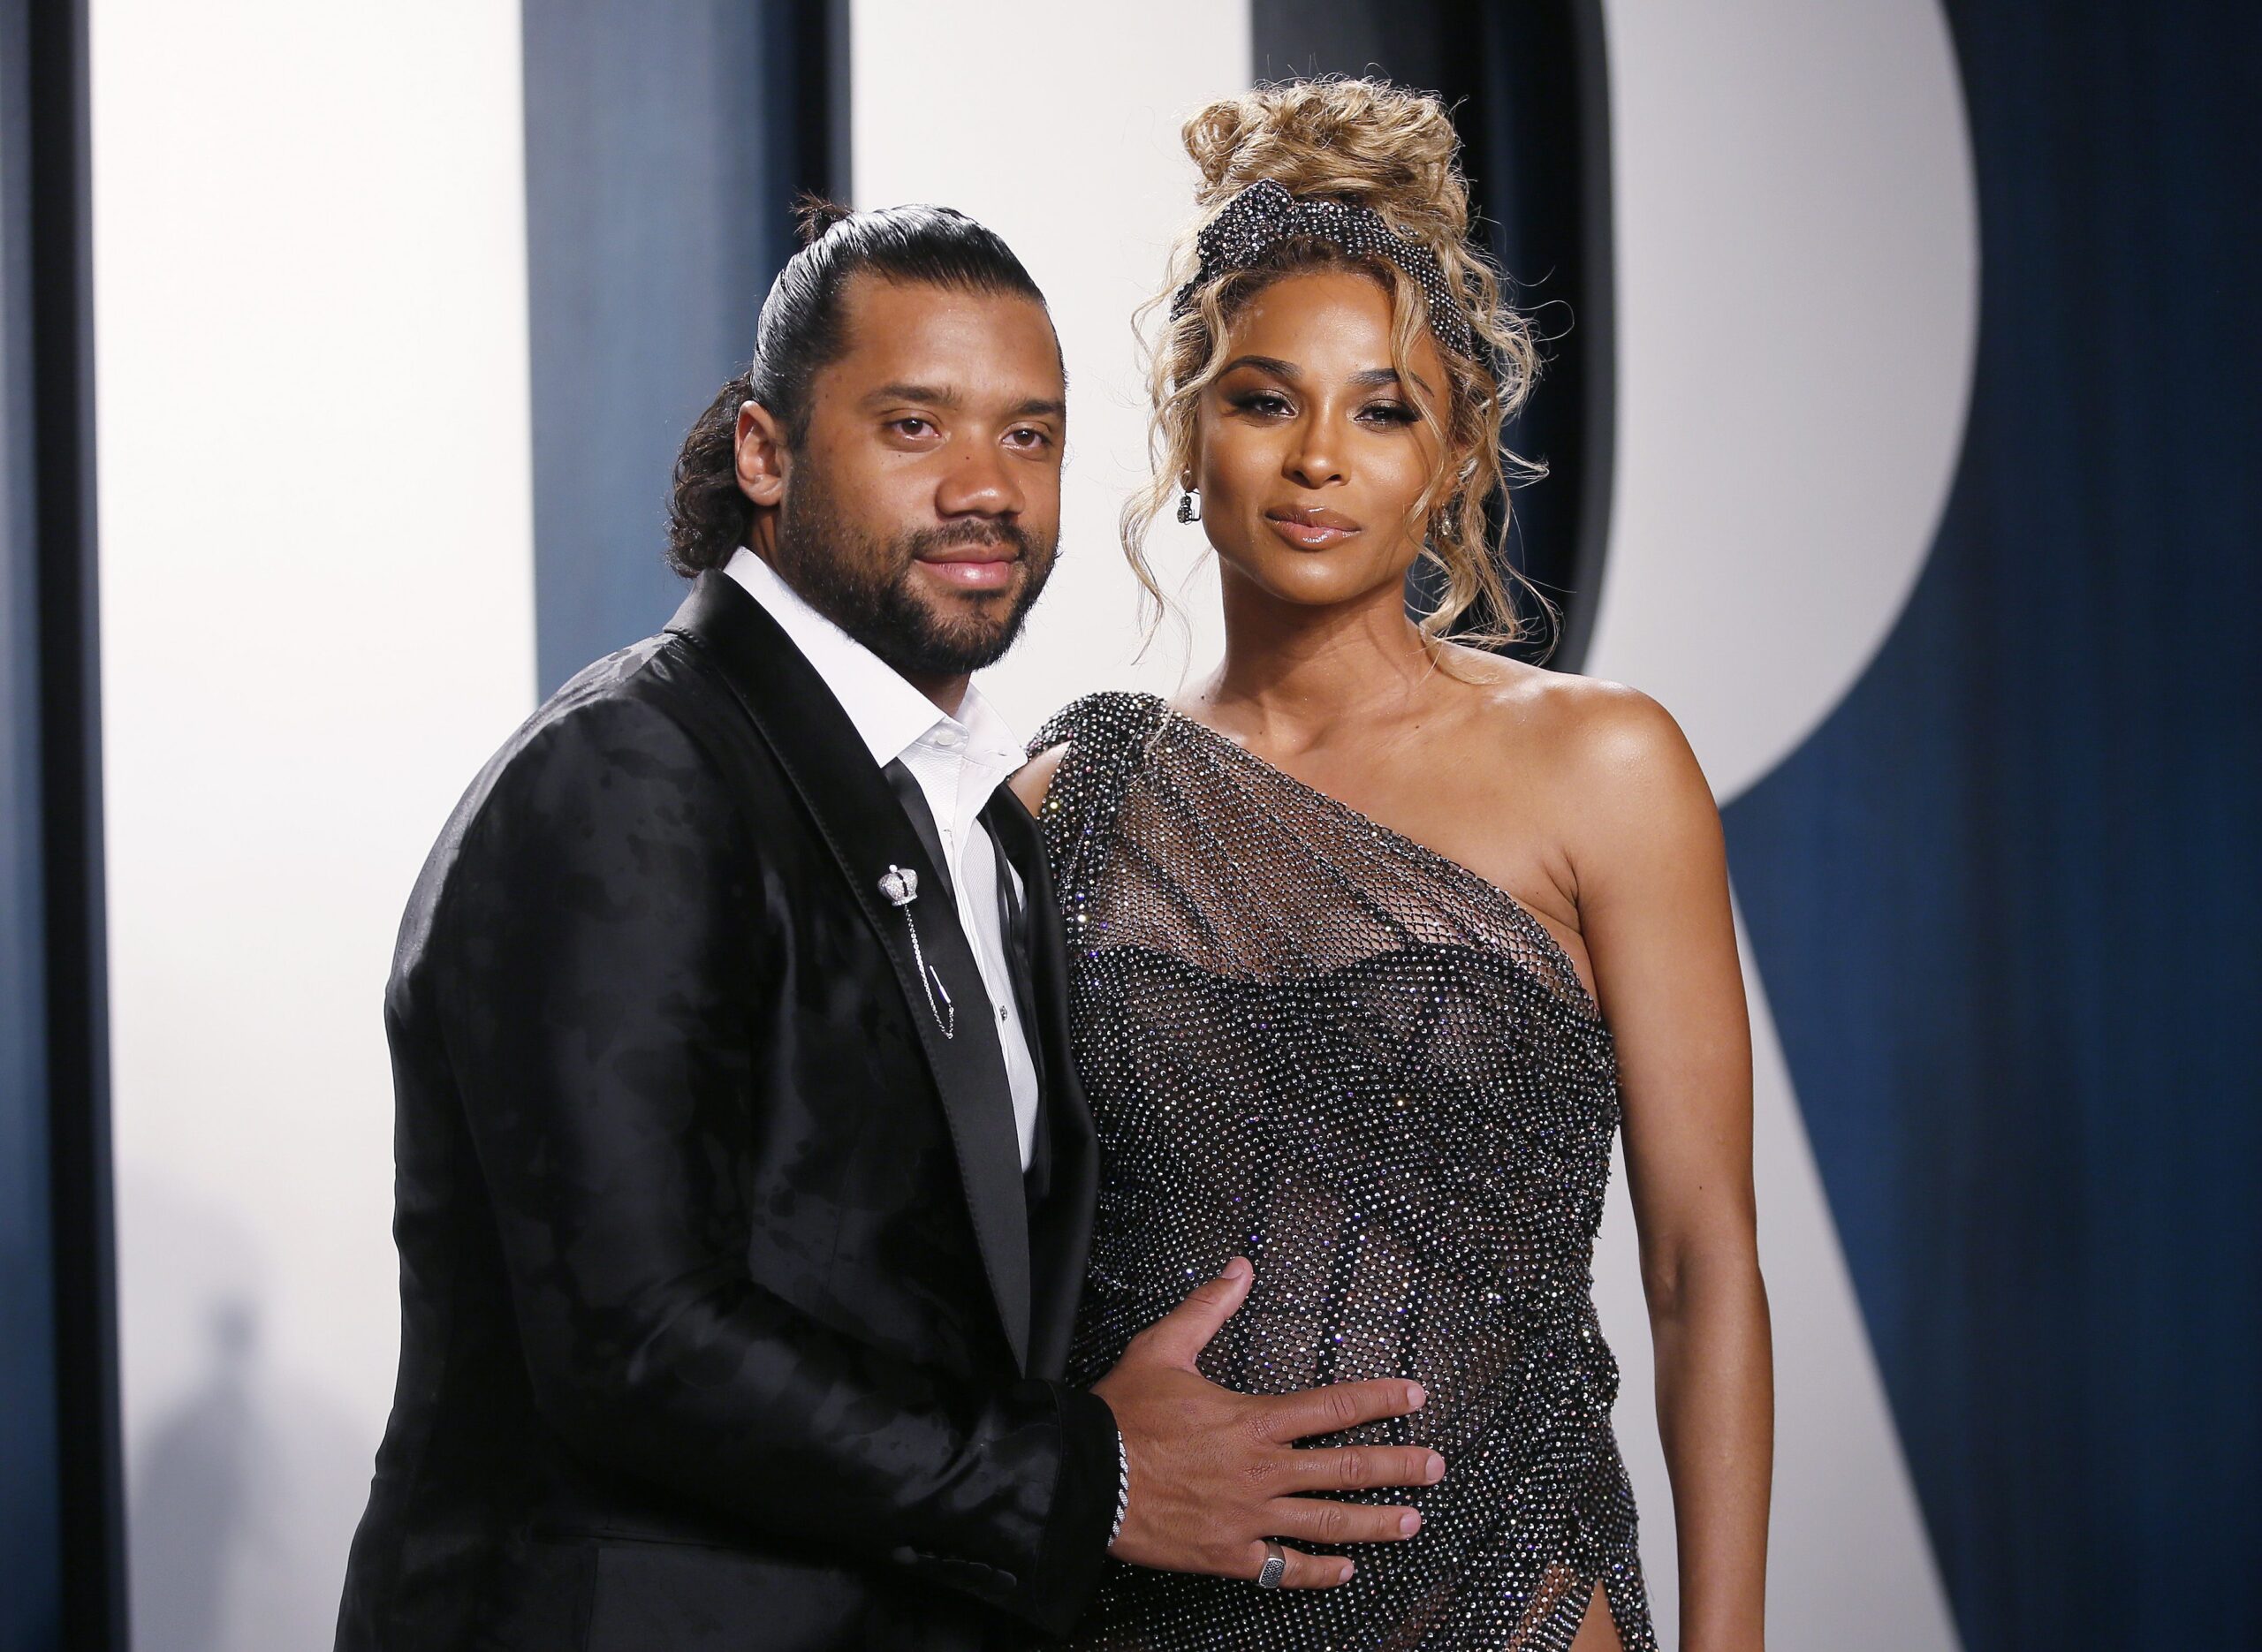 Ciara and Other Celebrity Births During COVID